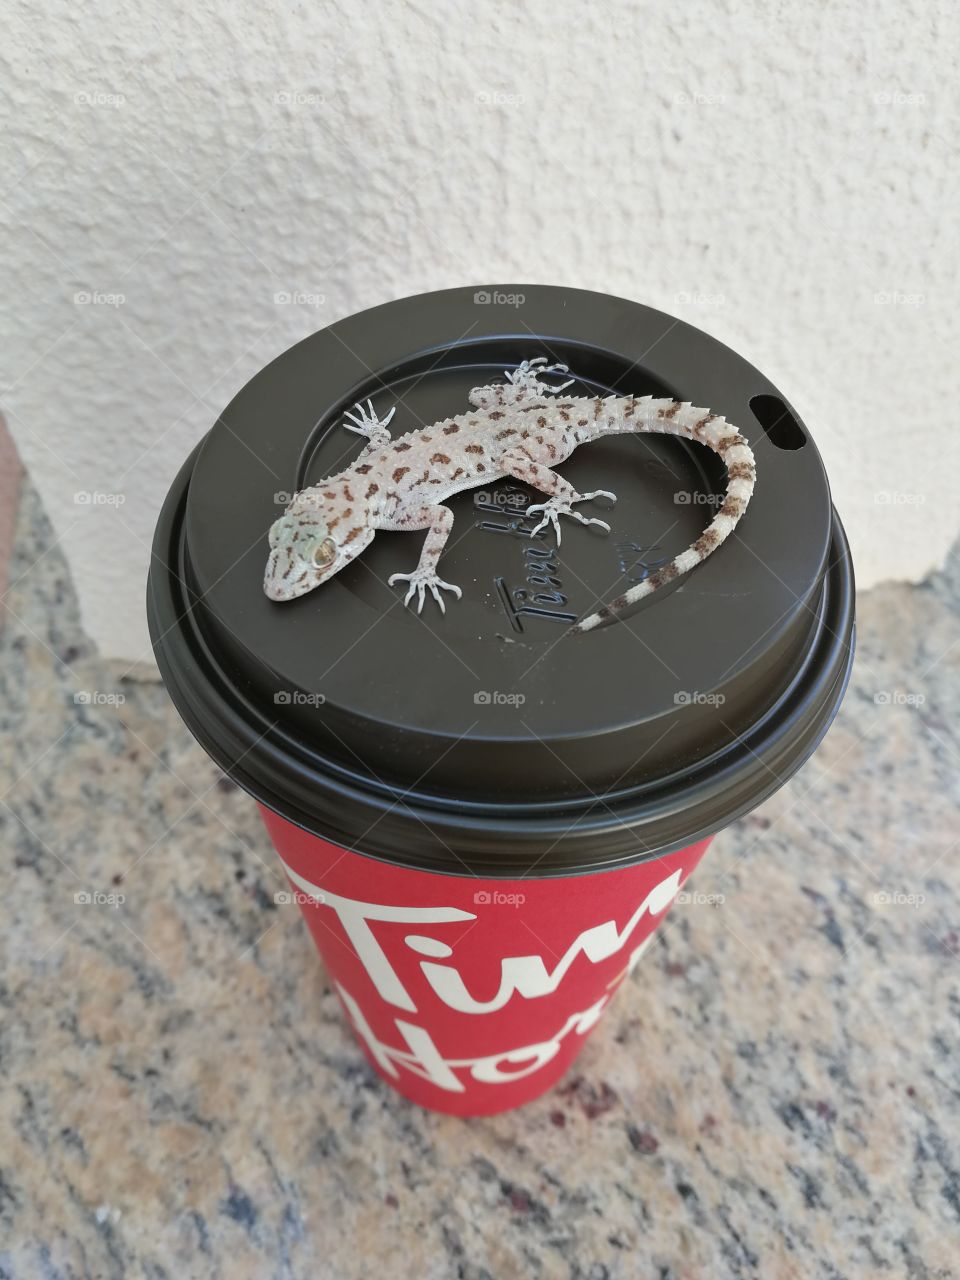 Tim Hortons coffee cup complete with lizard mascot